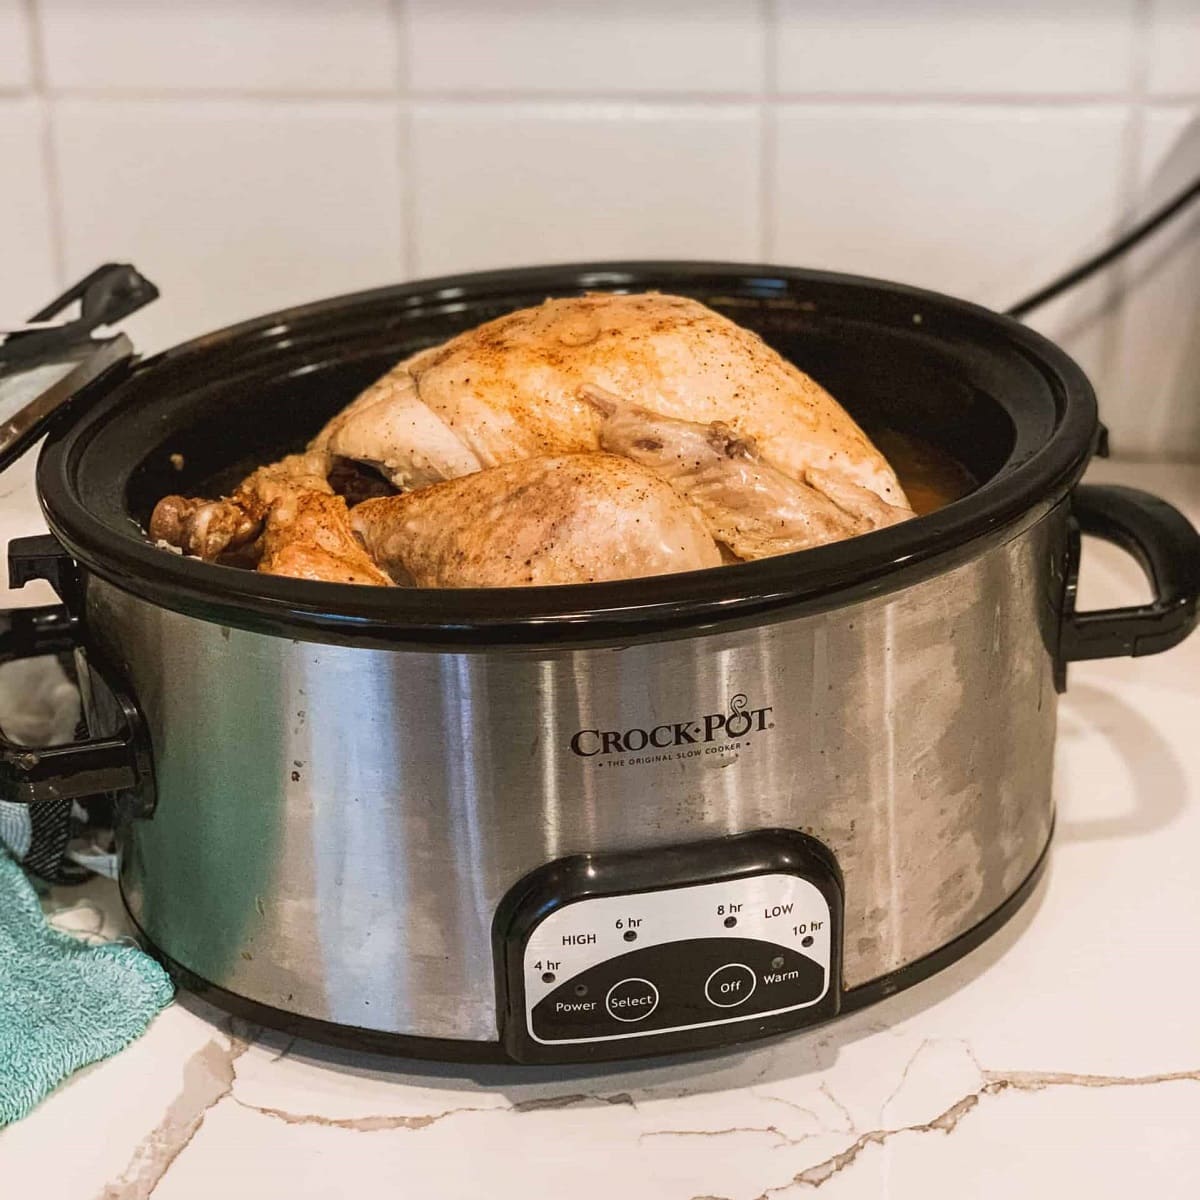 How Long To Cook Turkey In Slow Cooker